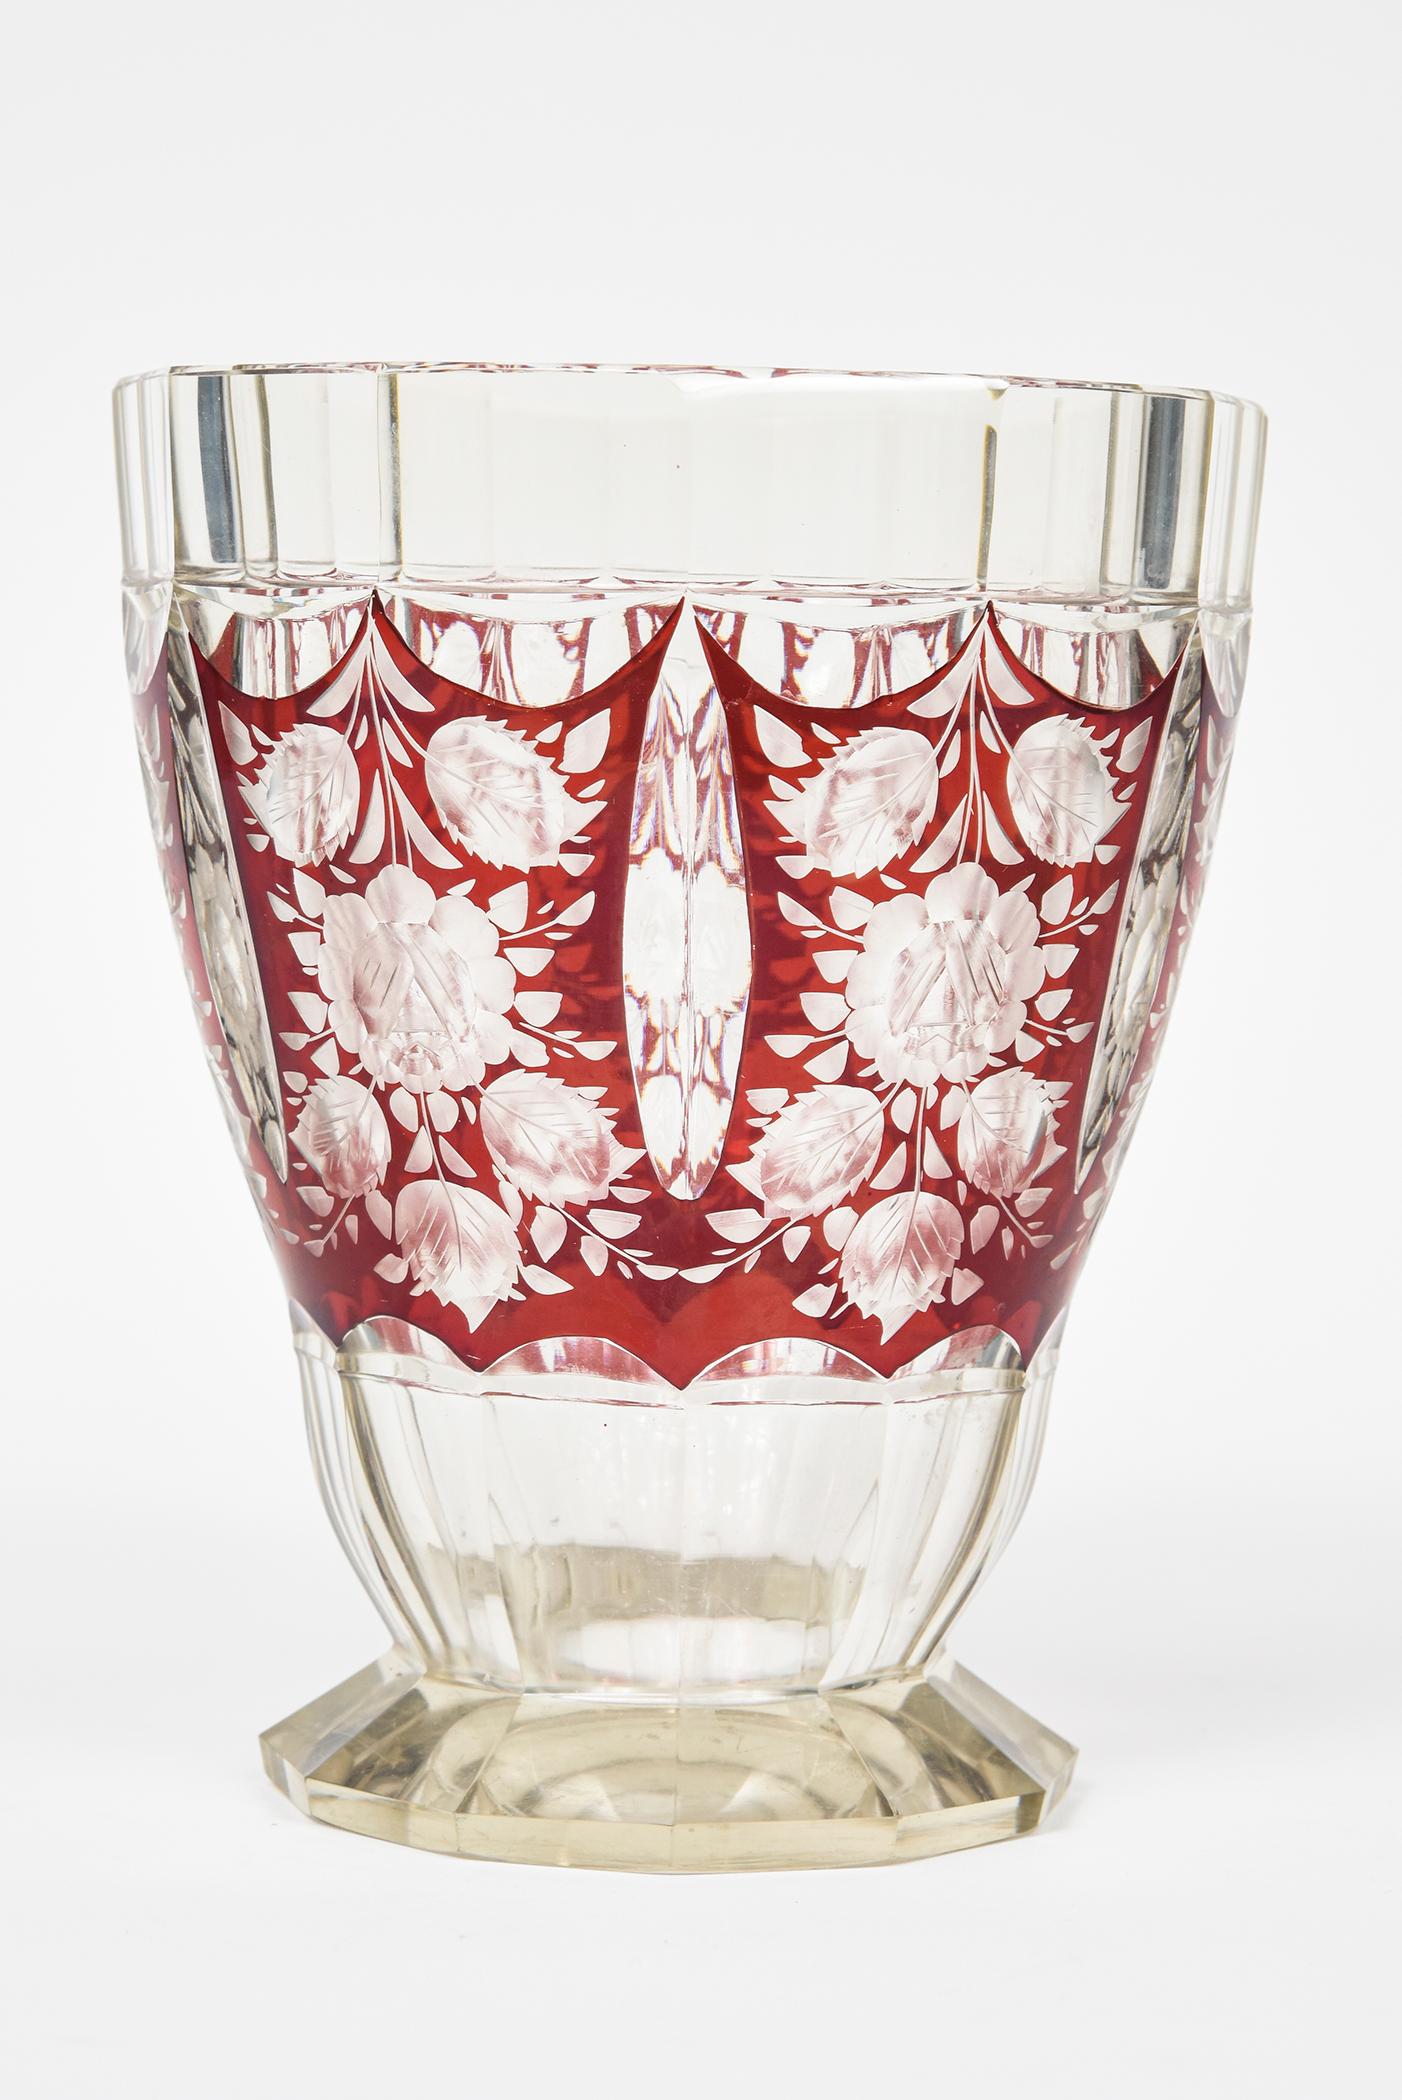 1930s Czech Art Deco cranberry red enamel and clear glass vase featuring a geometric shaped flaring body vase with a 12 sided foot base. The vase has 6 flower and leaf sections.